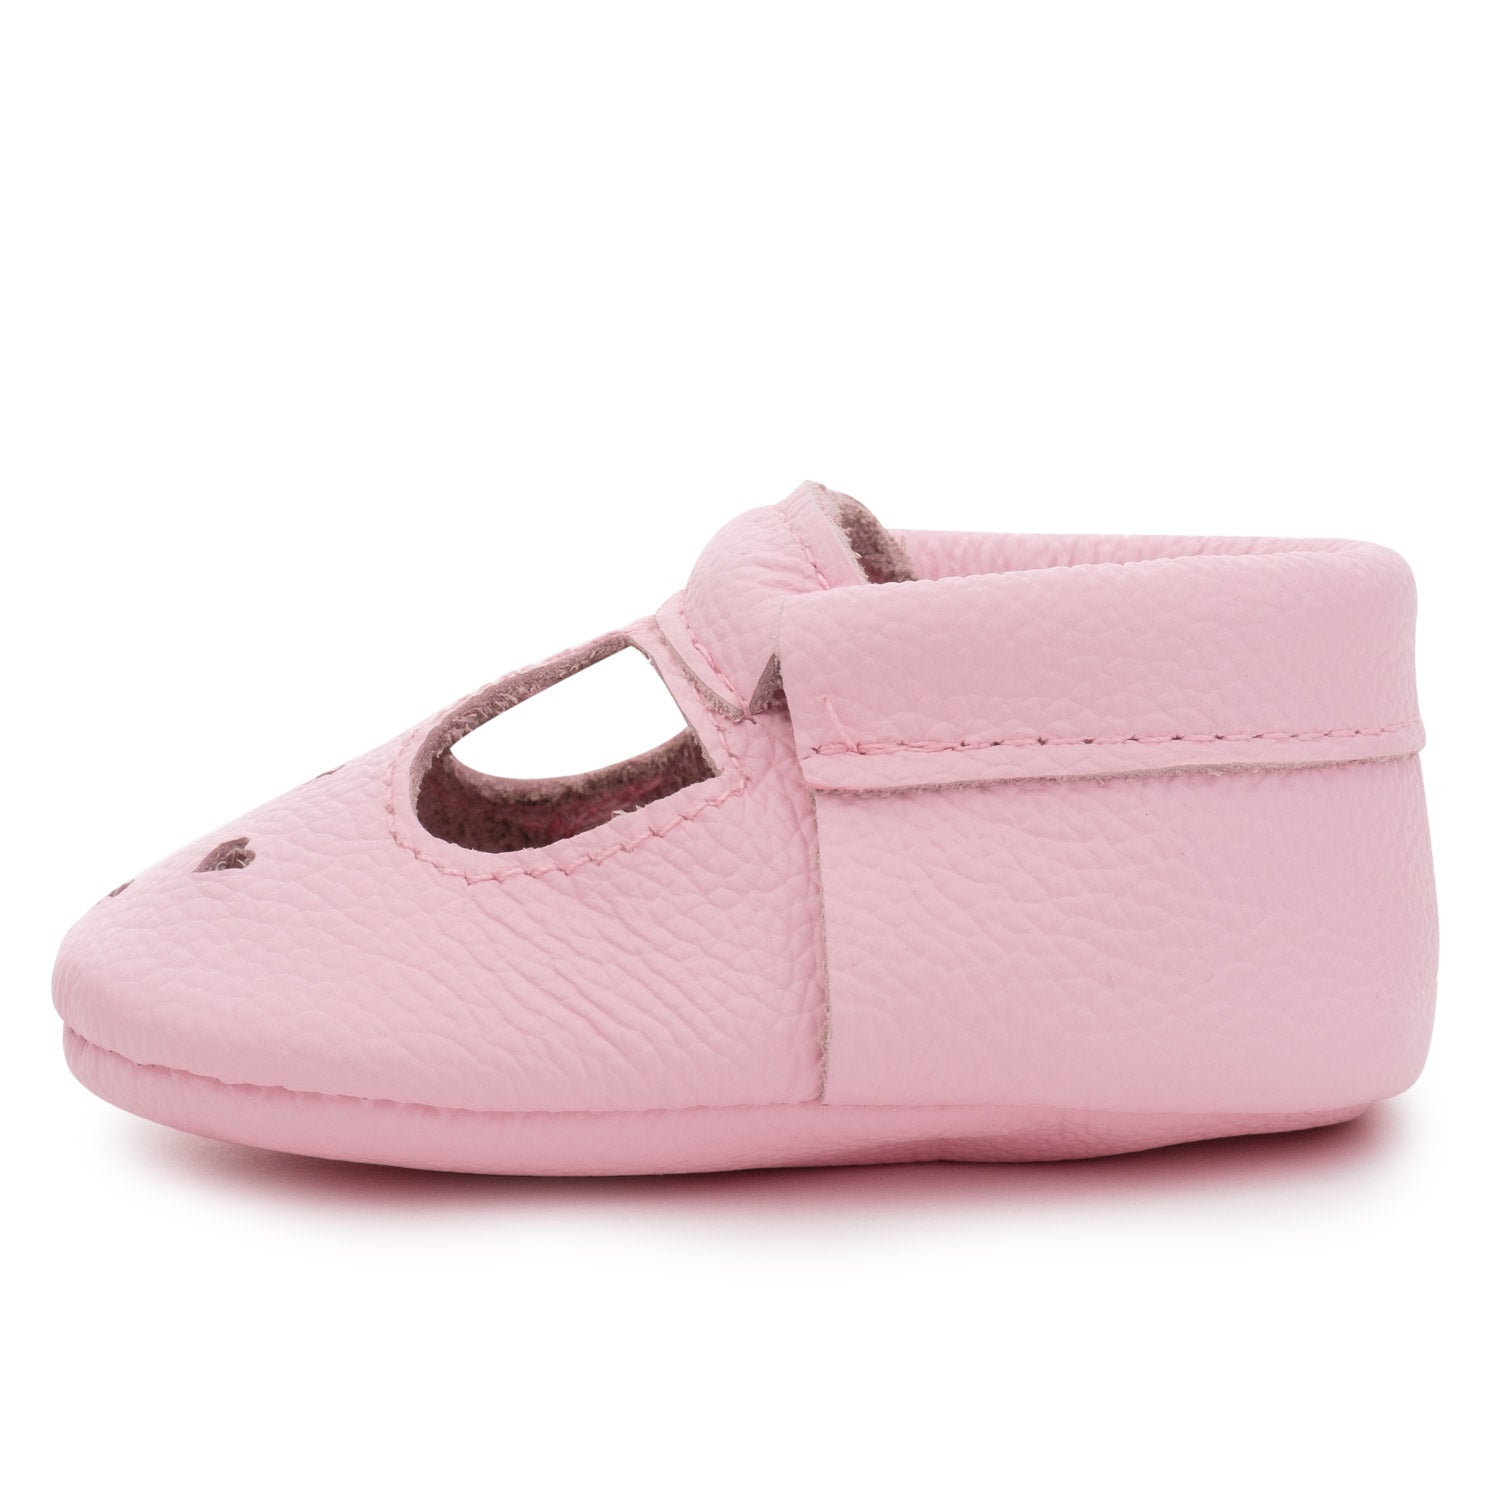 light pink baby shoes